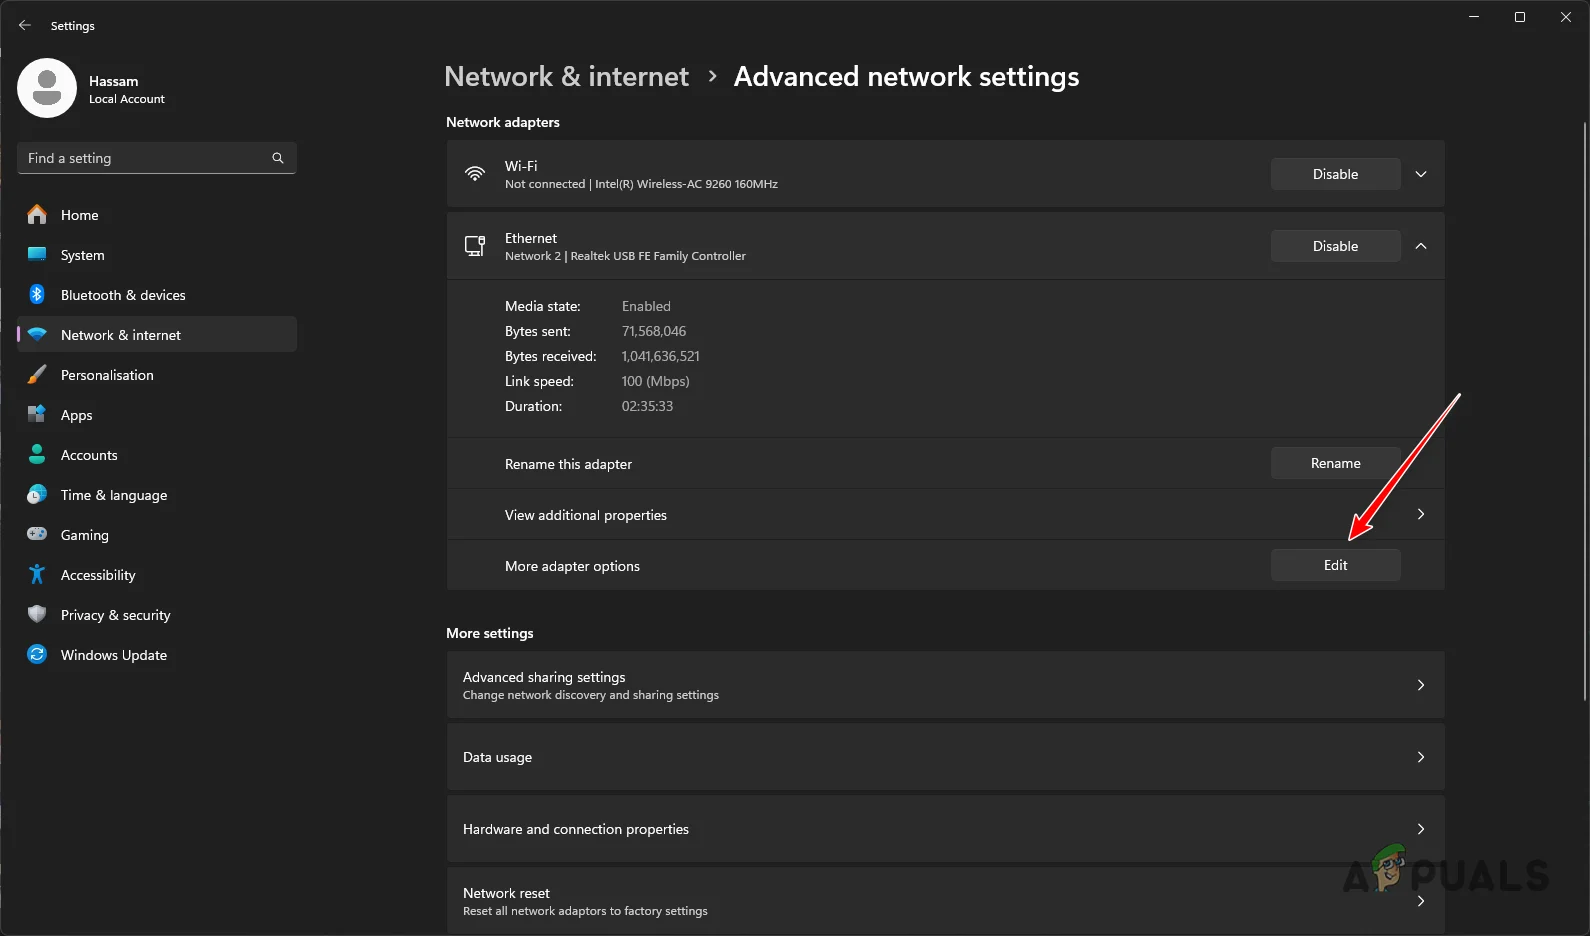 Accessing Network Adapter Options